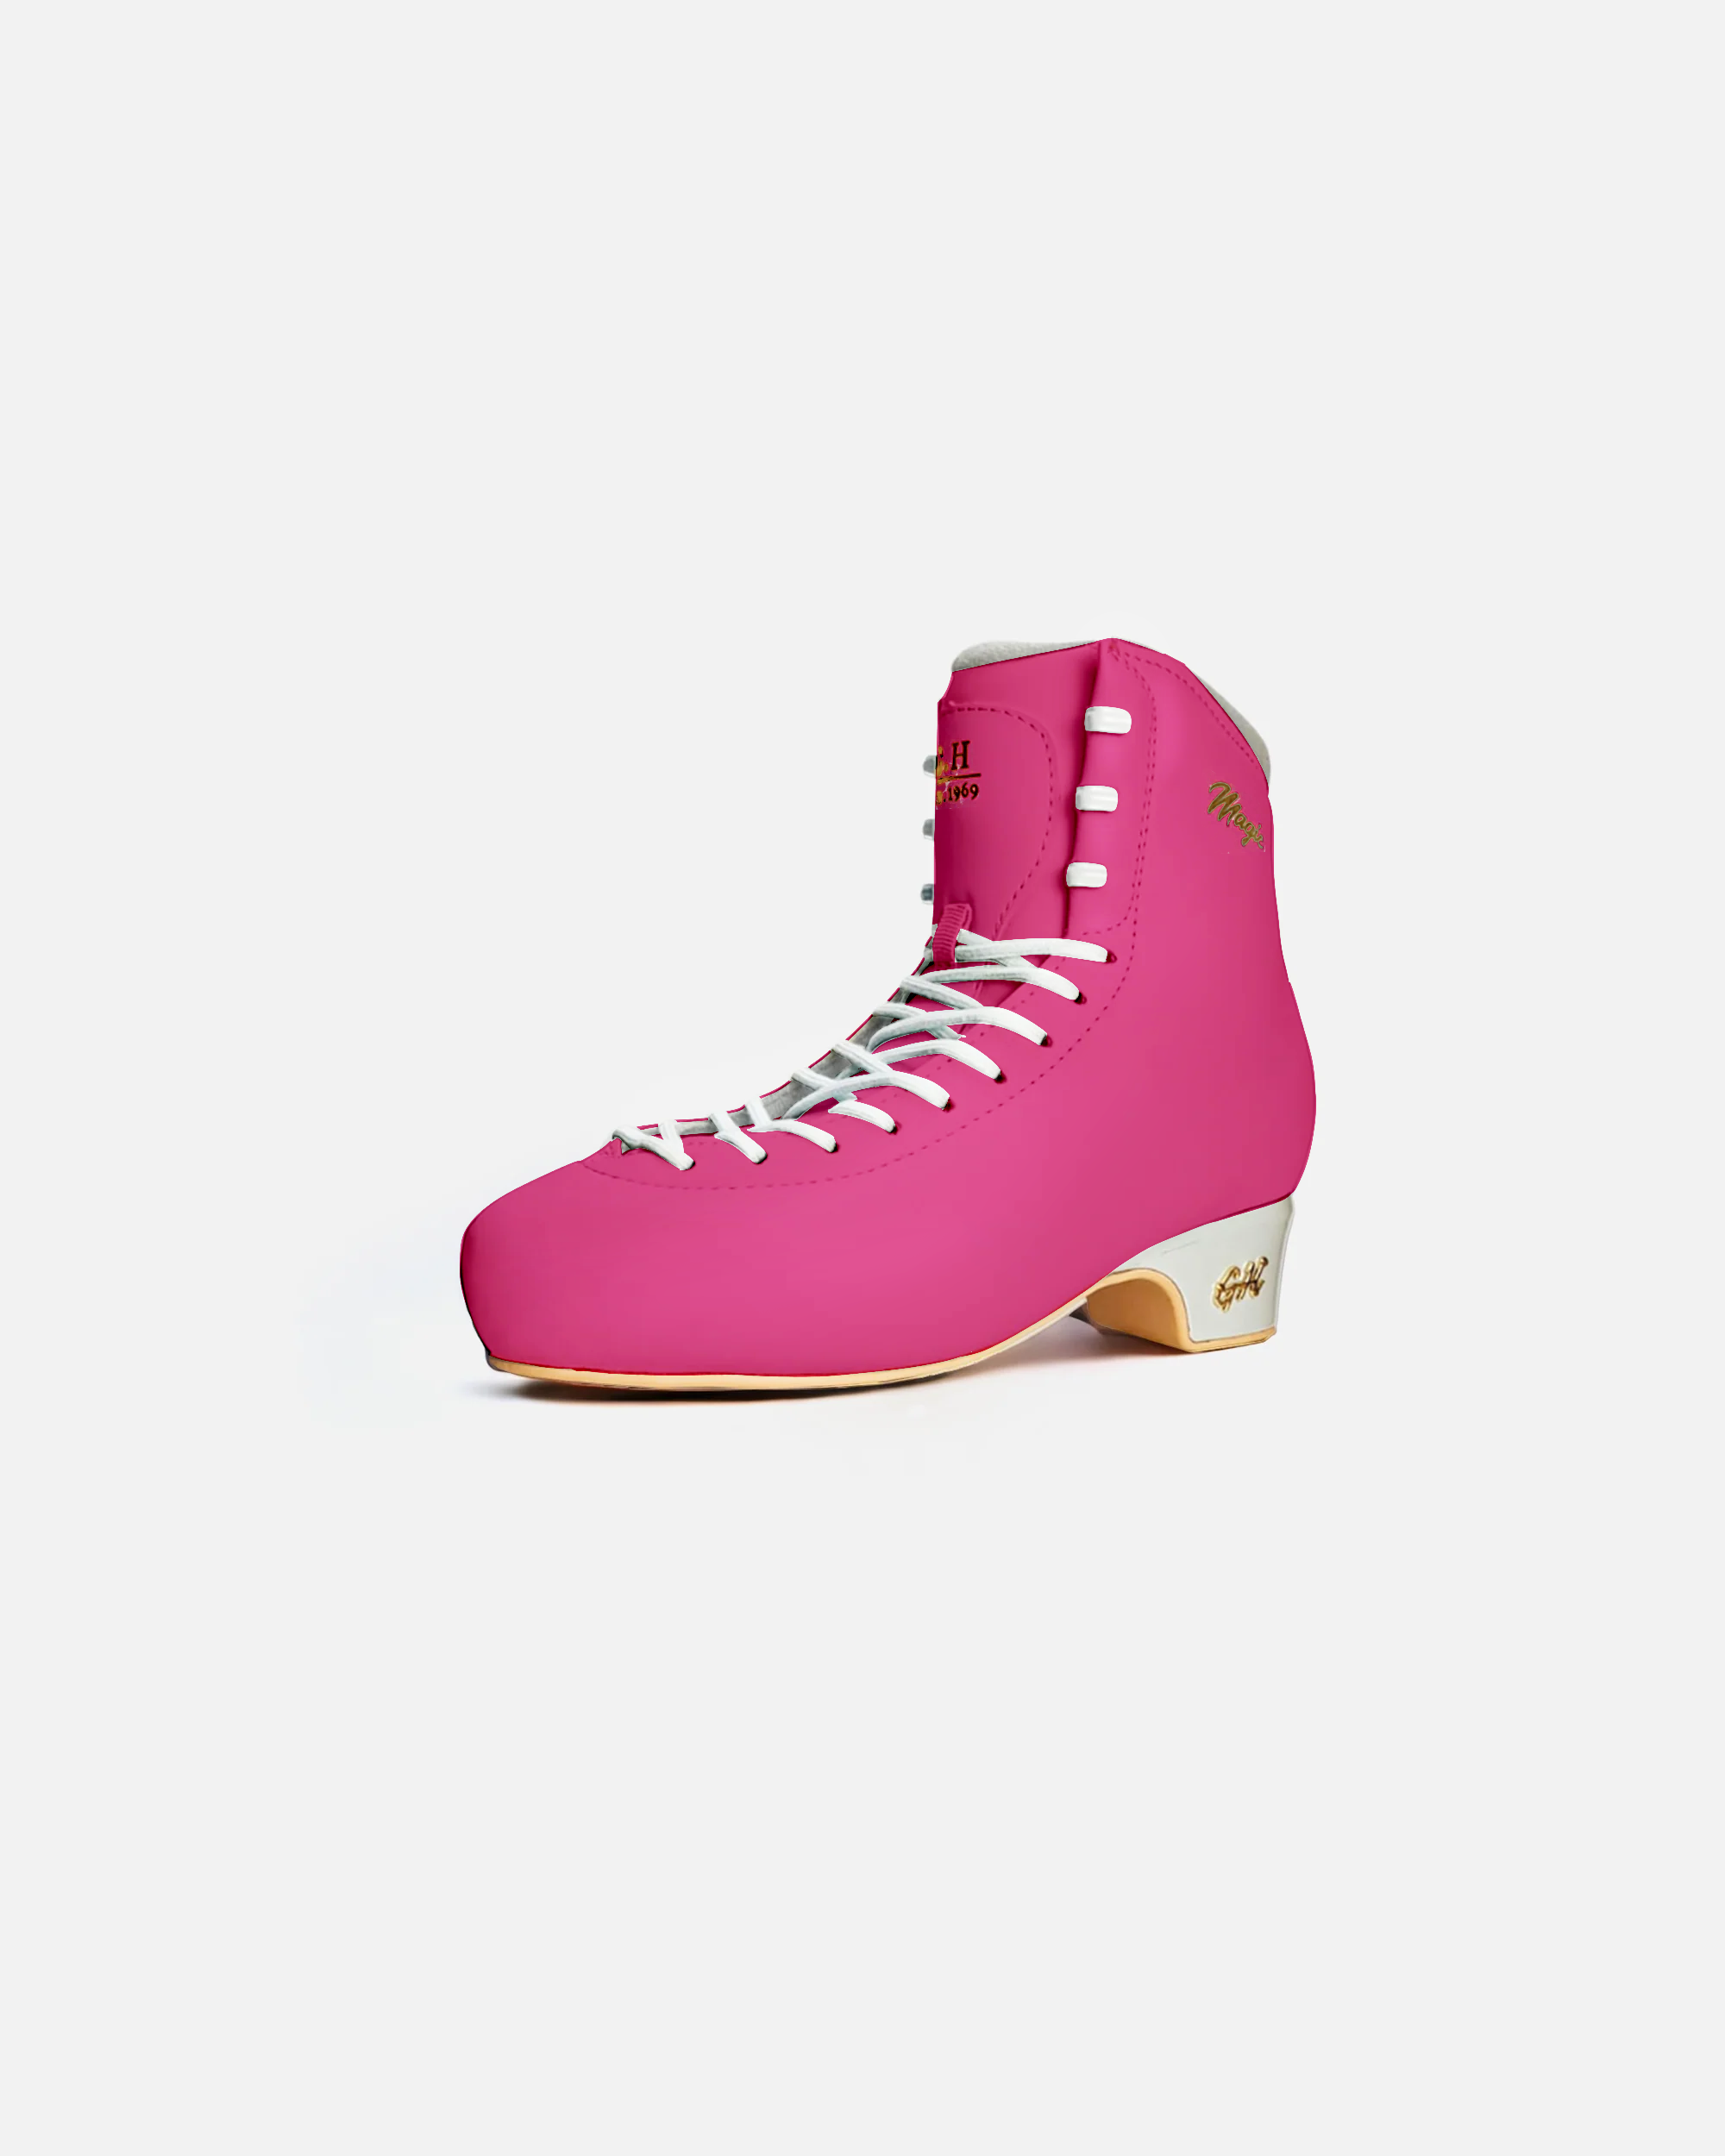 Magic Ice Skates (Boots Only)